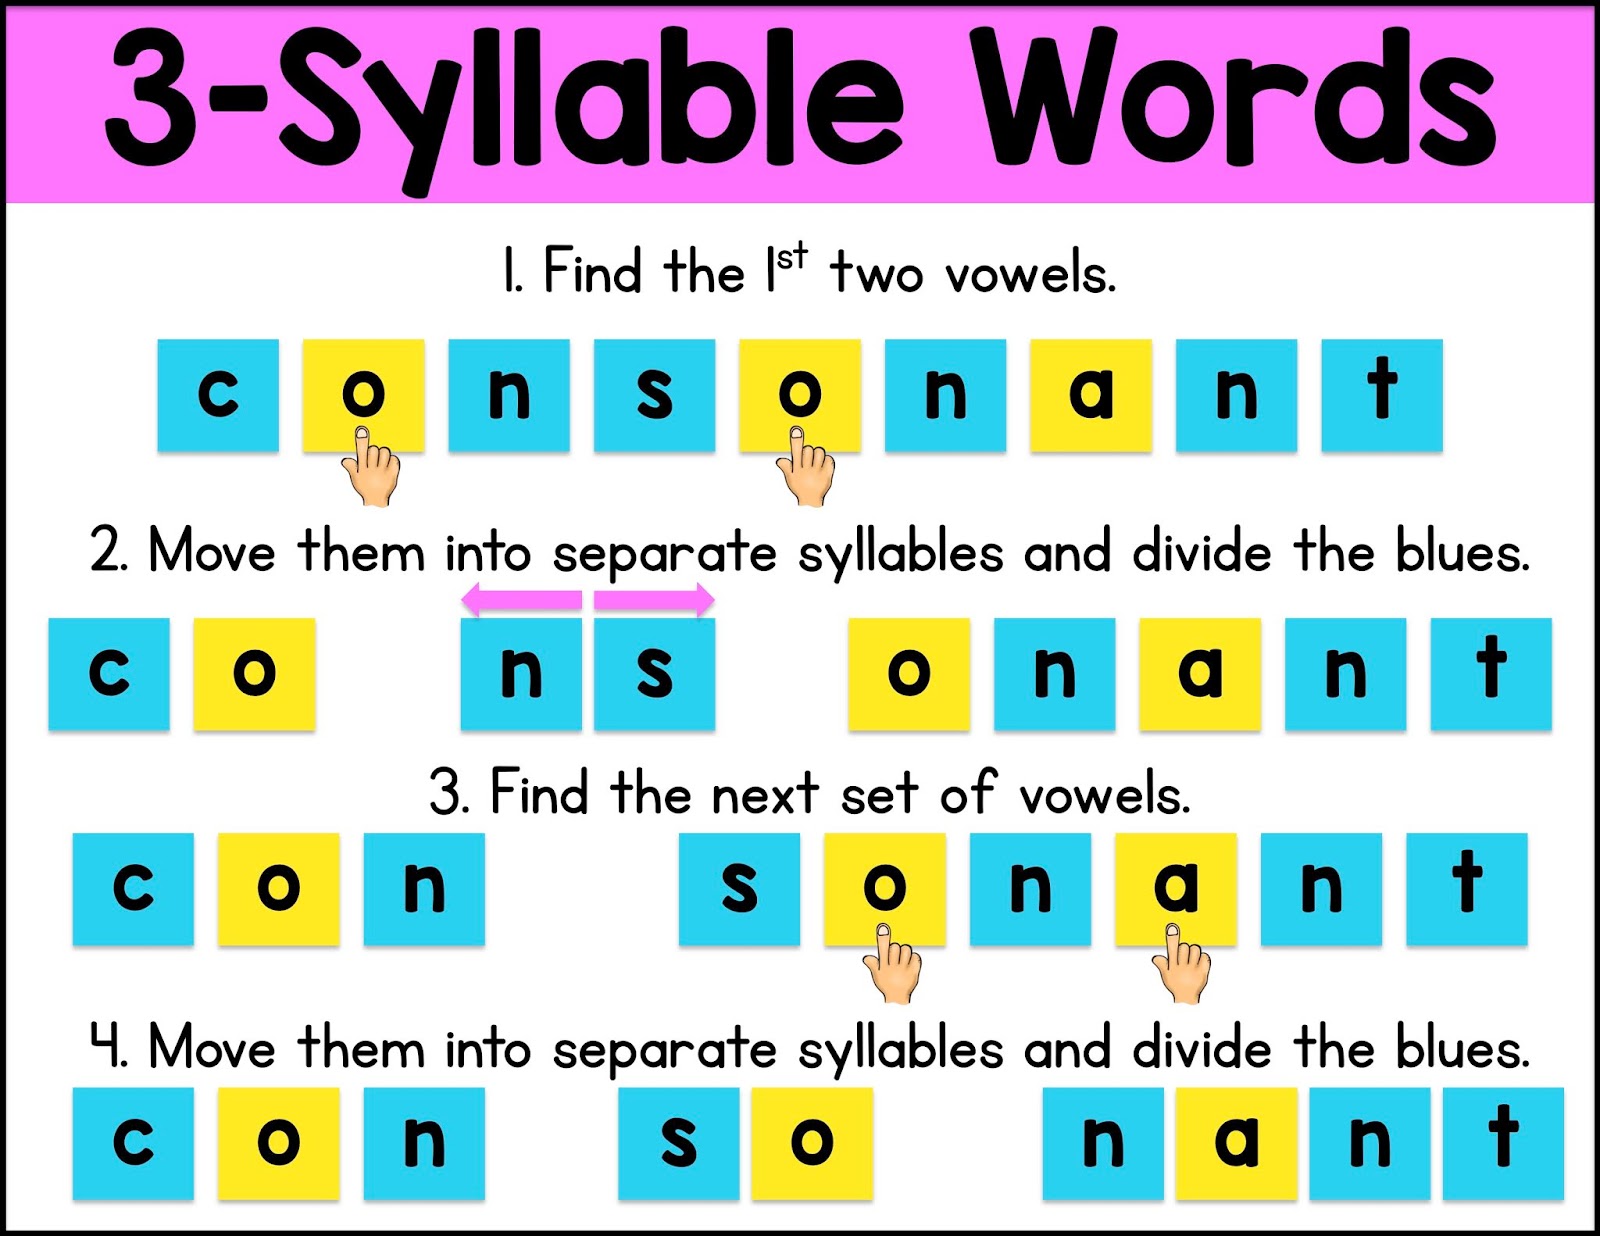 write the part of speech and syllable division for denizen